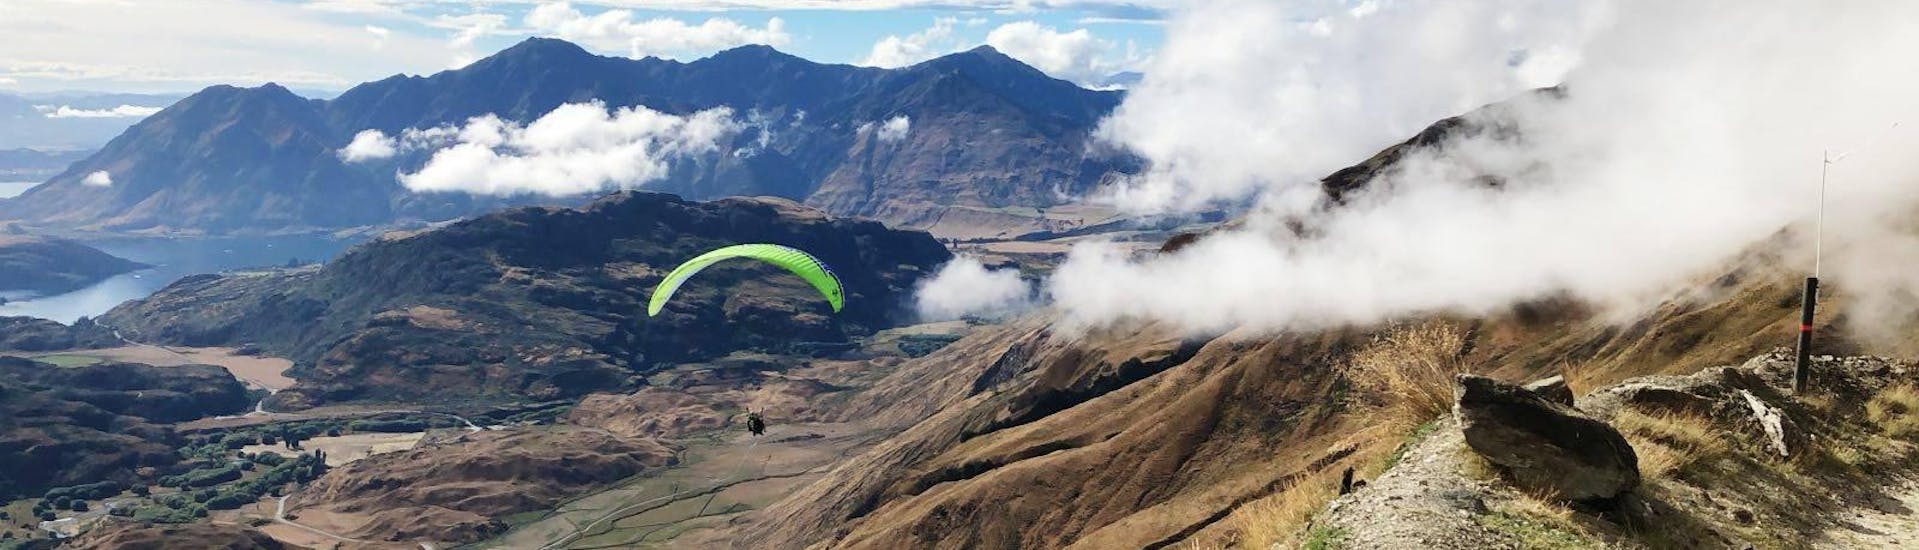 A breathtaking view of the landscapes near Wanaka during a tandem paragliding flight by Wanaka Paragliding.